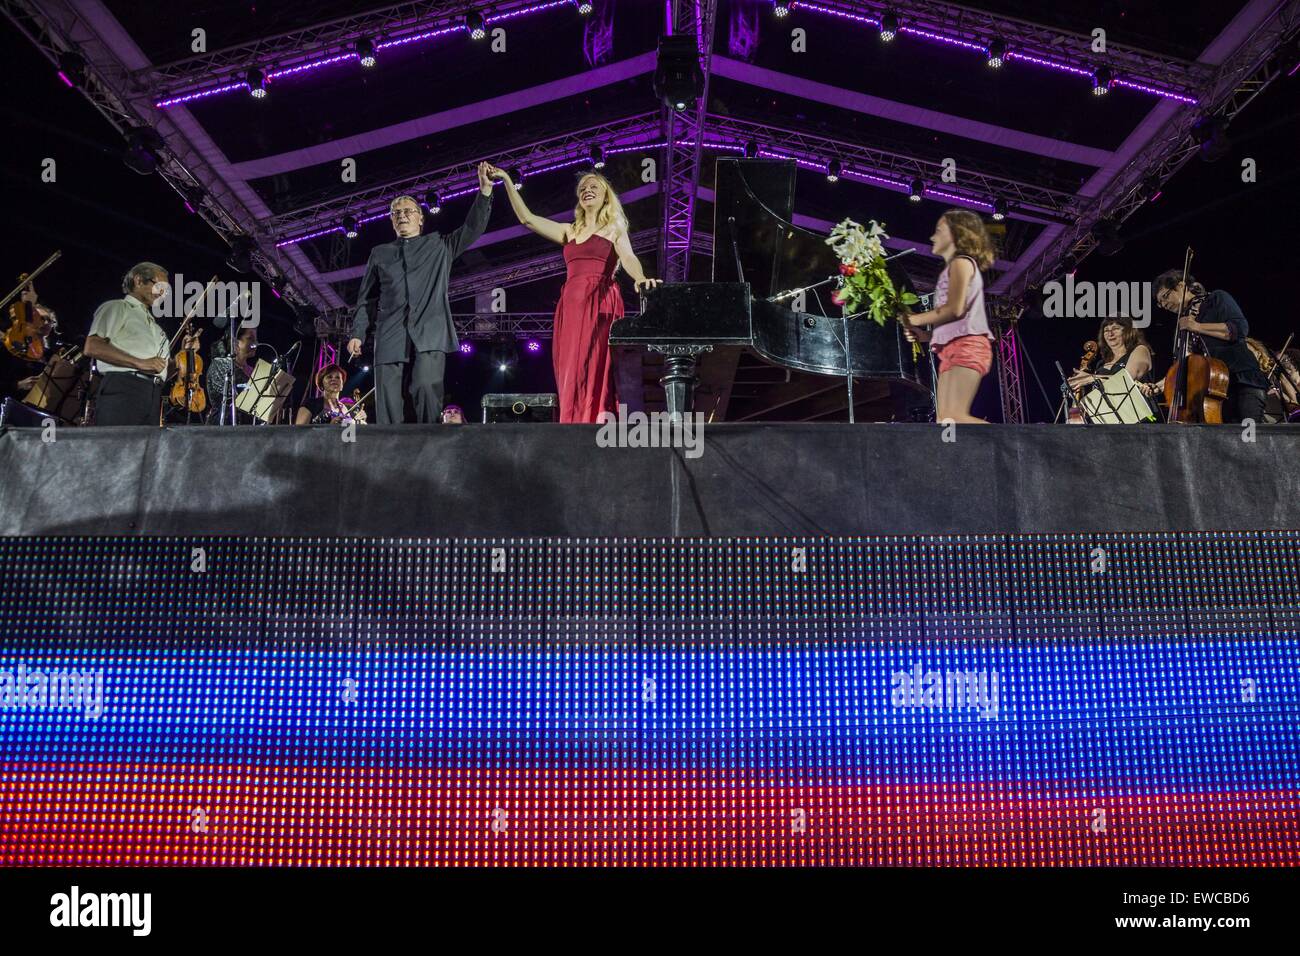 Donetsk, Donetsk oblast, Ukraine. 22nd June, 2015. Famous pianist Valentina Lisitsa, greets the public over a neon flag of the Donetsk People's Republica, after a concert dedicated to the 74th anniversary of the start of the Great Patriotic War.in Donetsk, Ukraine. © Celestino Arce/ZUMA Wire/ZUMAPRESS.com/Alamy Live News Stock Photo